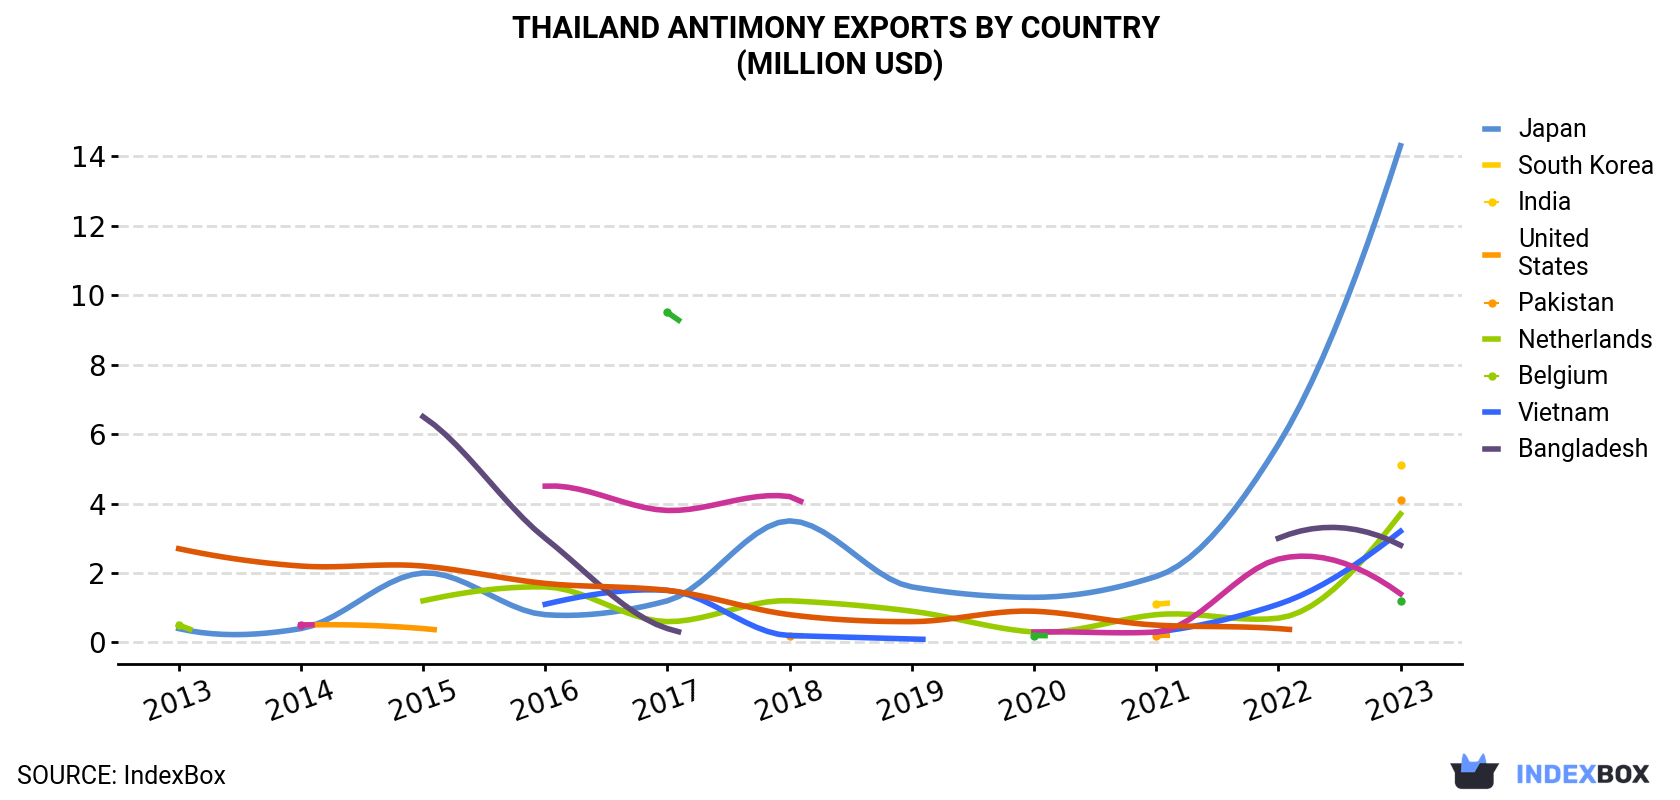 Thailand Antimony Exports By Country (Million USD)